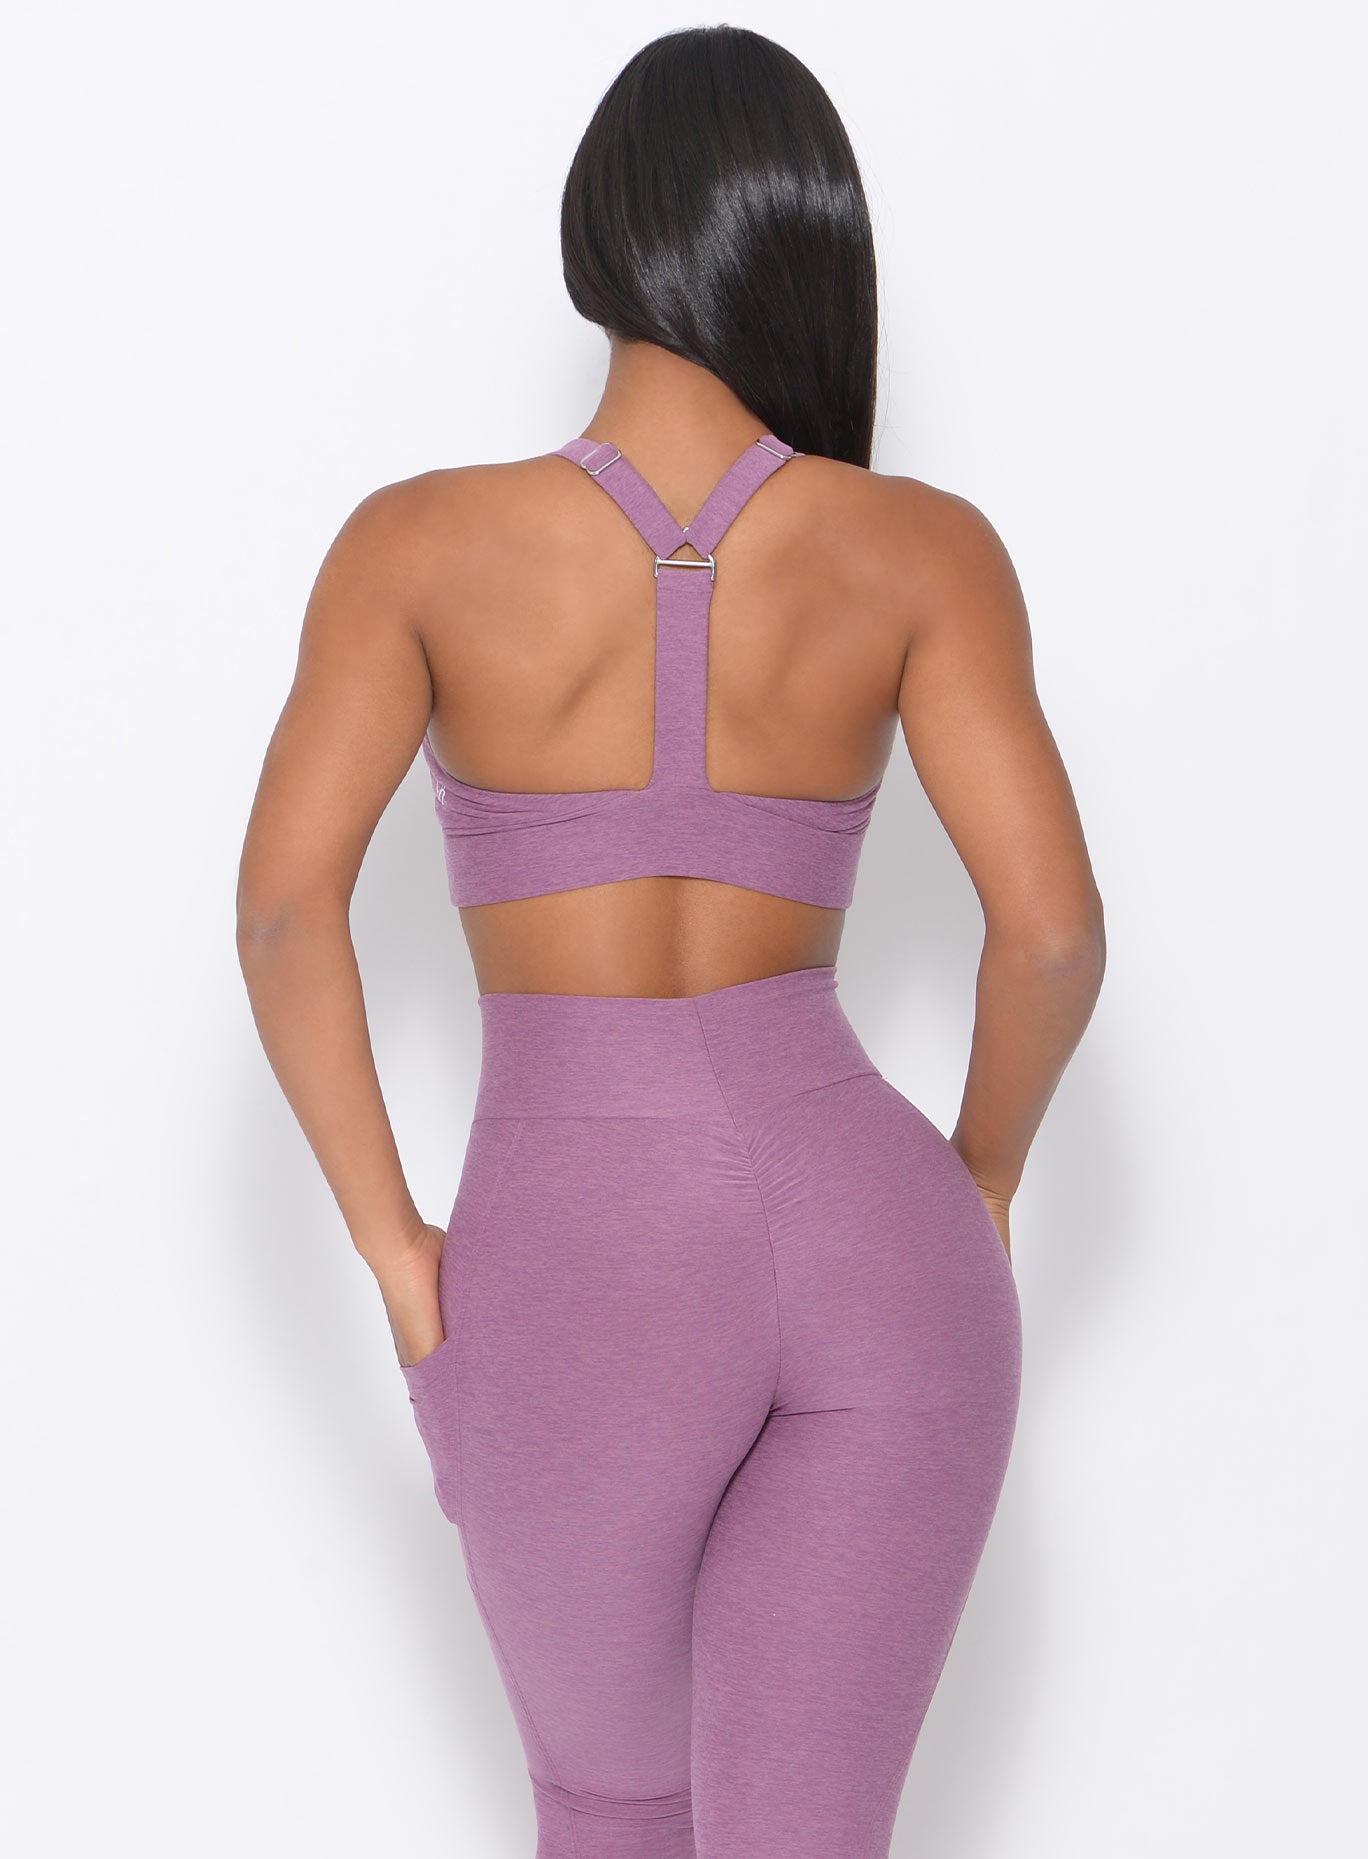 back view of the model wearing our perfection sports bra in lavender and a matching leggings